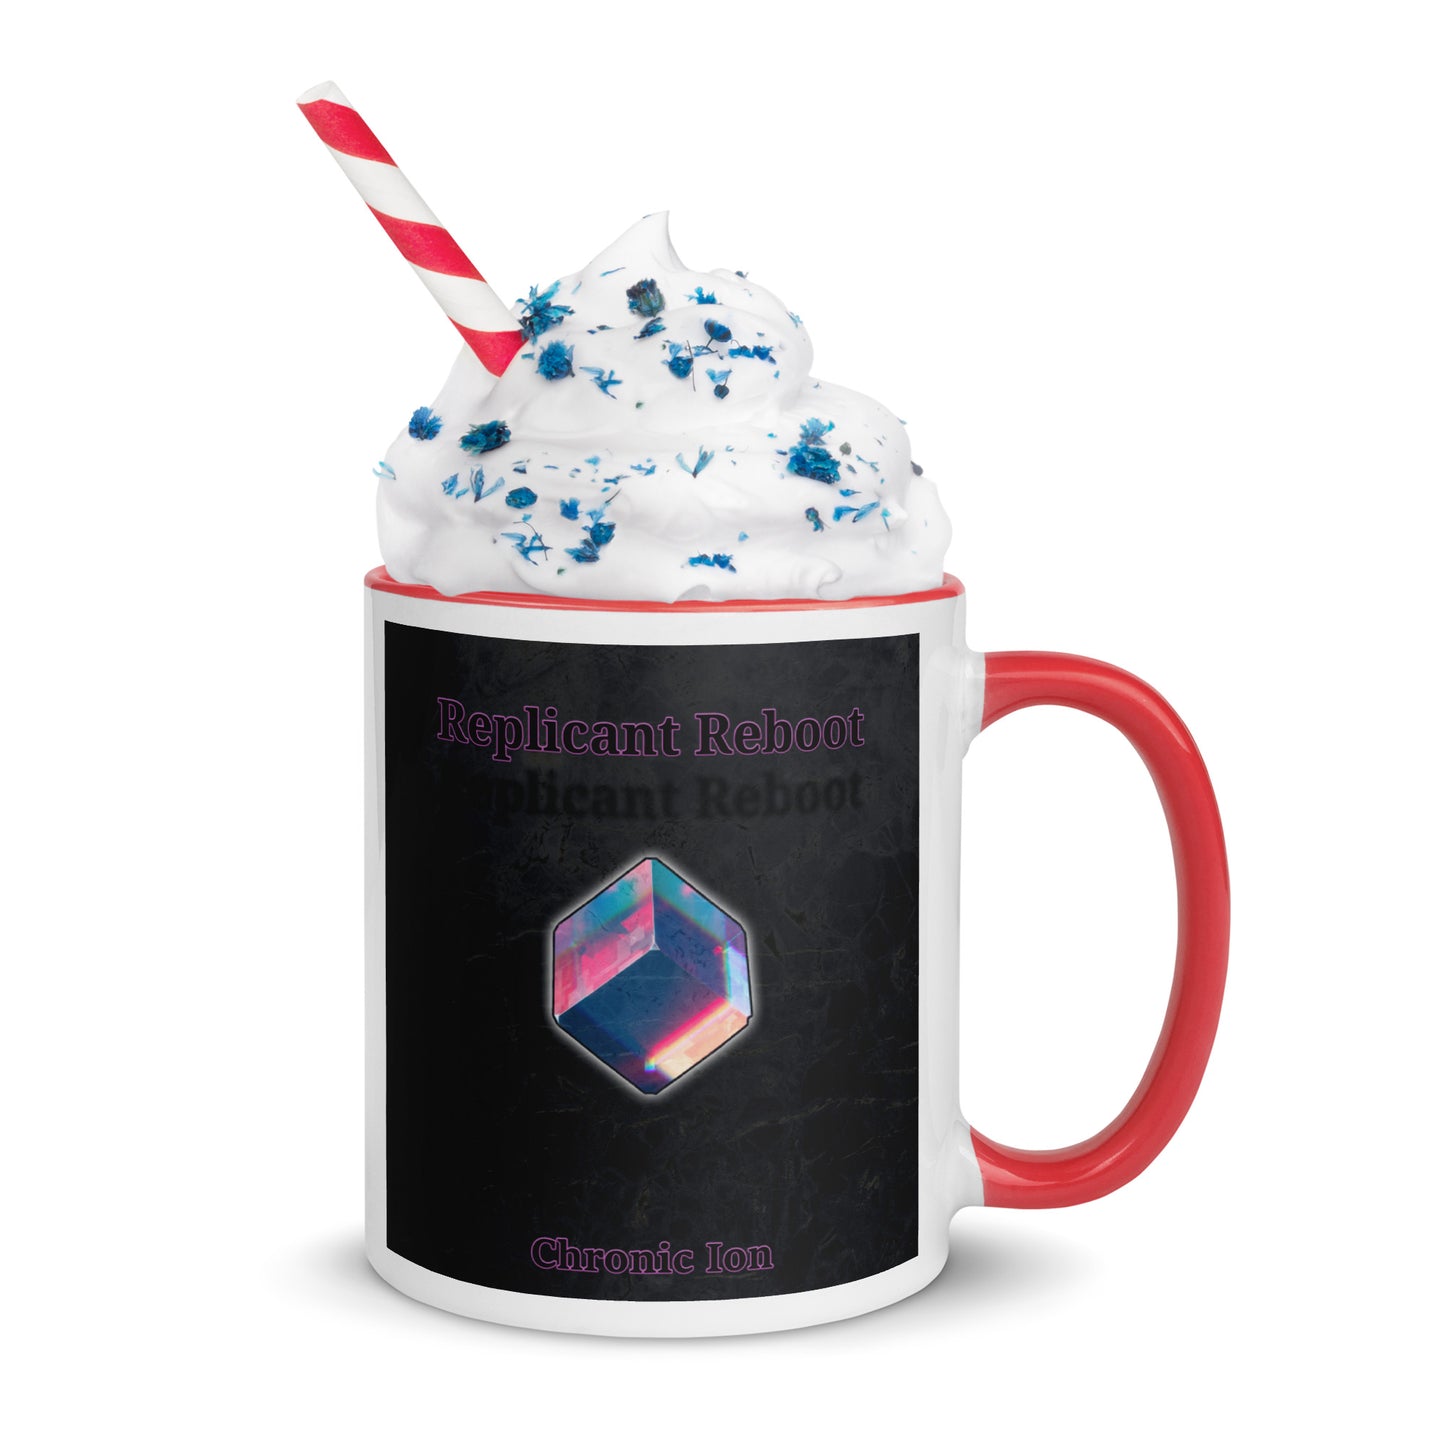 Chronic Ion - Replicant Reboot Mug With Color Inside